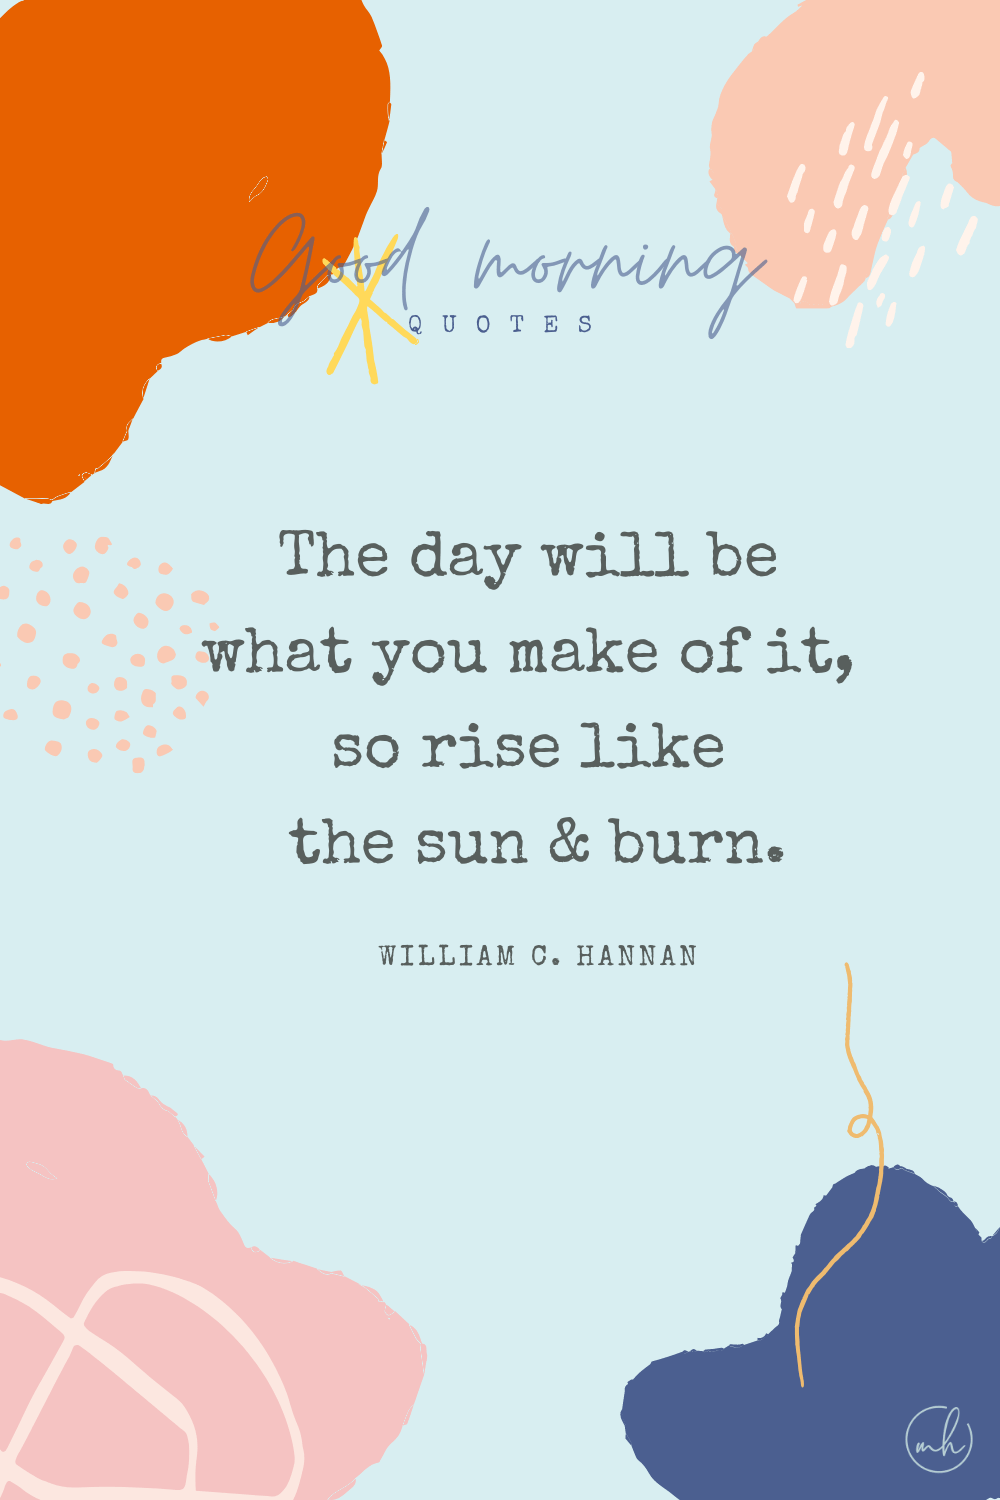 "The day will be what you make of it, so rise like the sun & burn." - William C Hannan